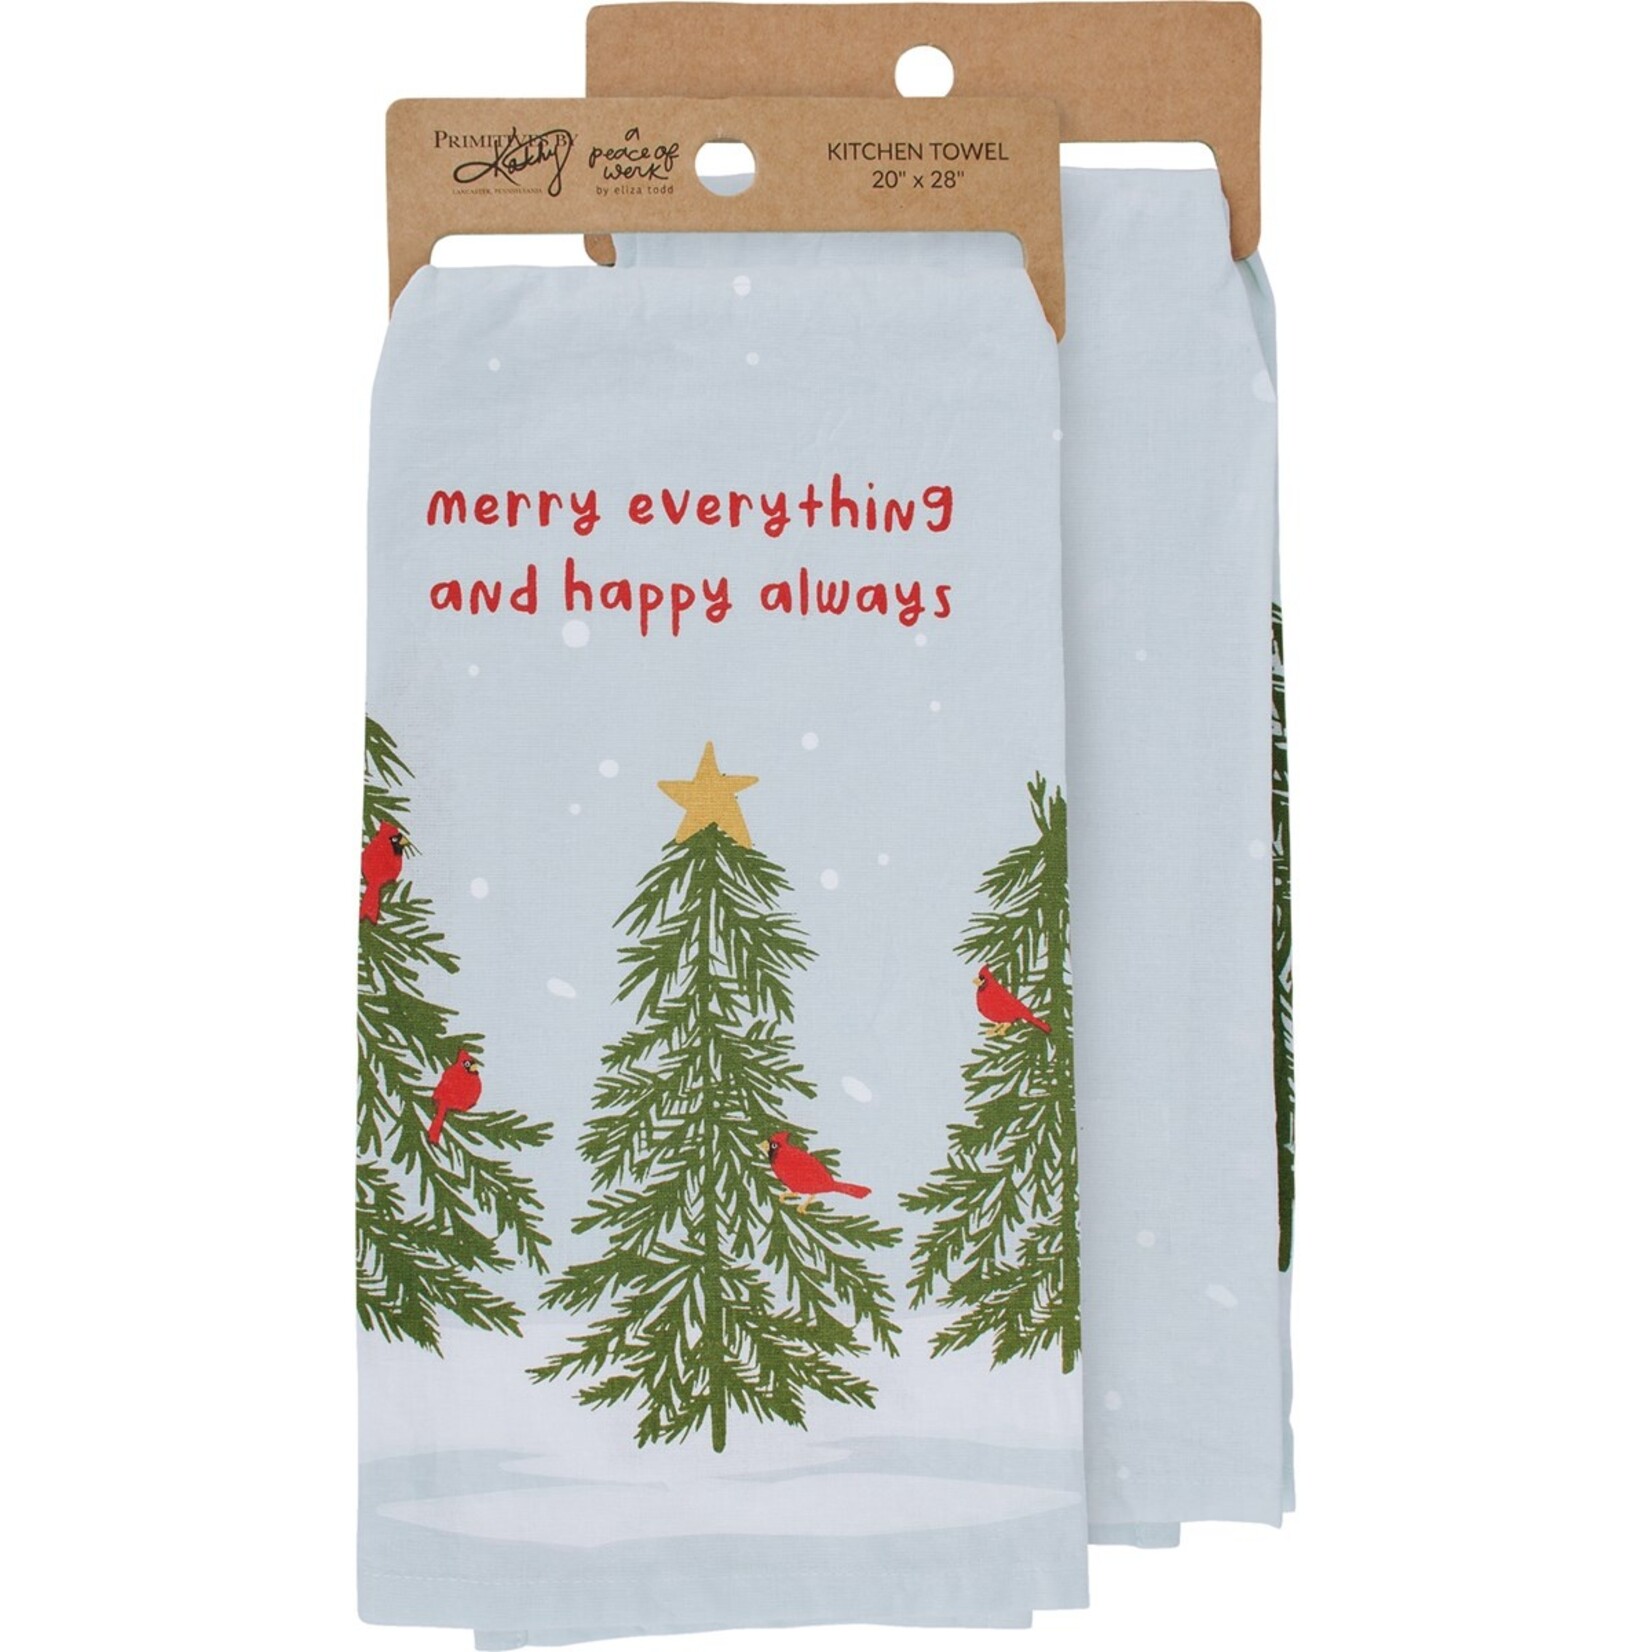 Primitives by Kathy Primitives by Kathy- Merry Everything Cardinal Kitchen Towel